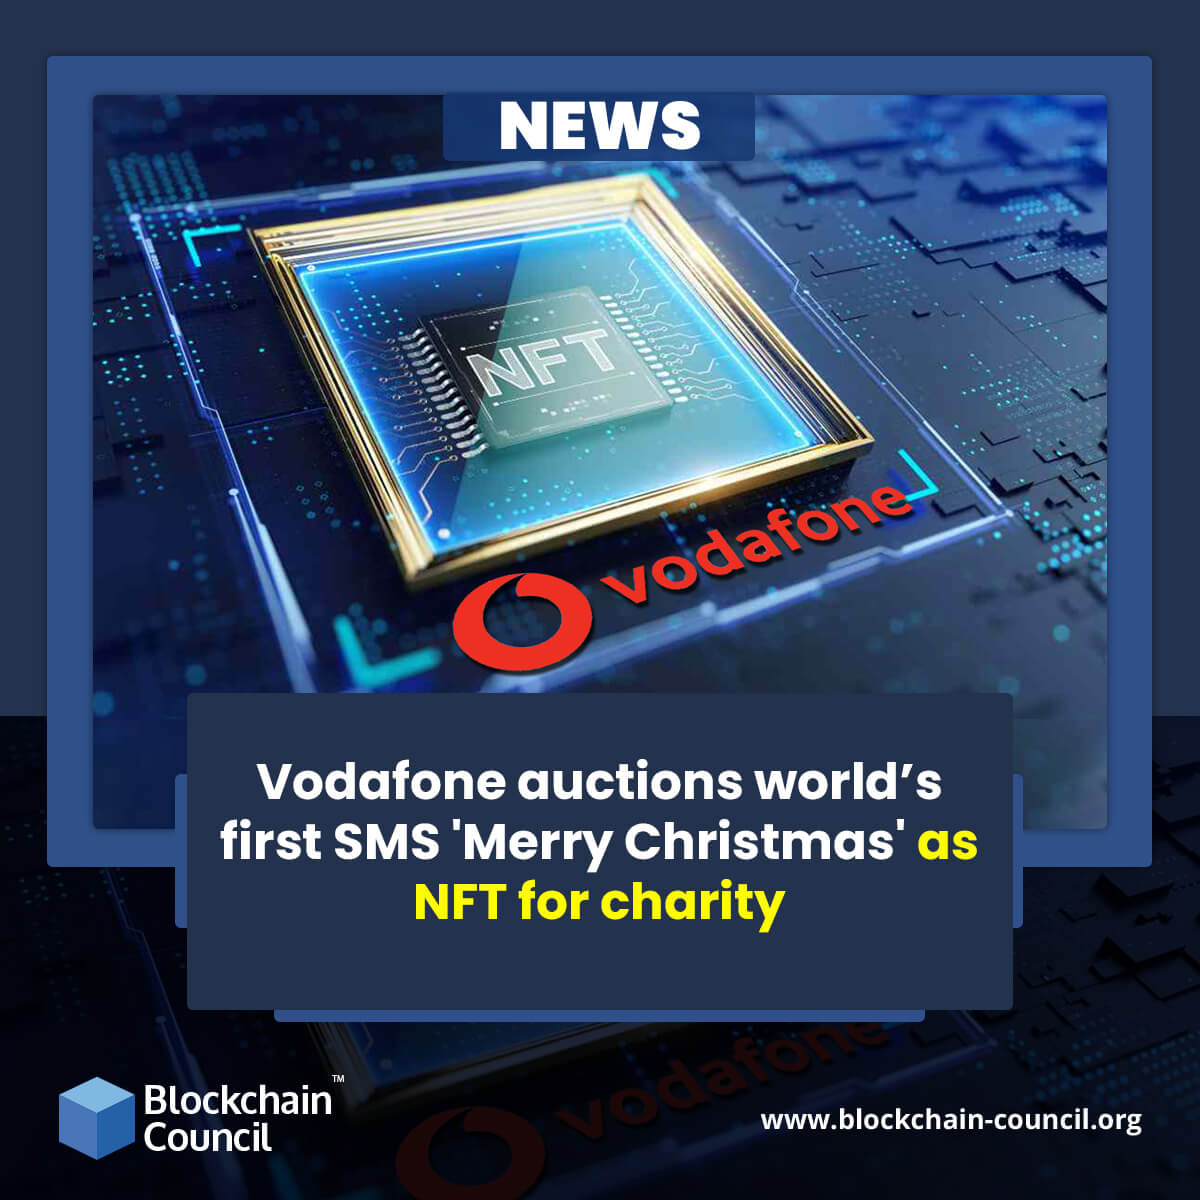 Vodafone auctions world’s first SMS 'Merry Christmas' as NFT for charity